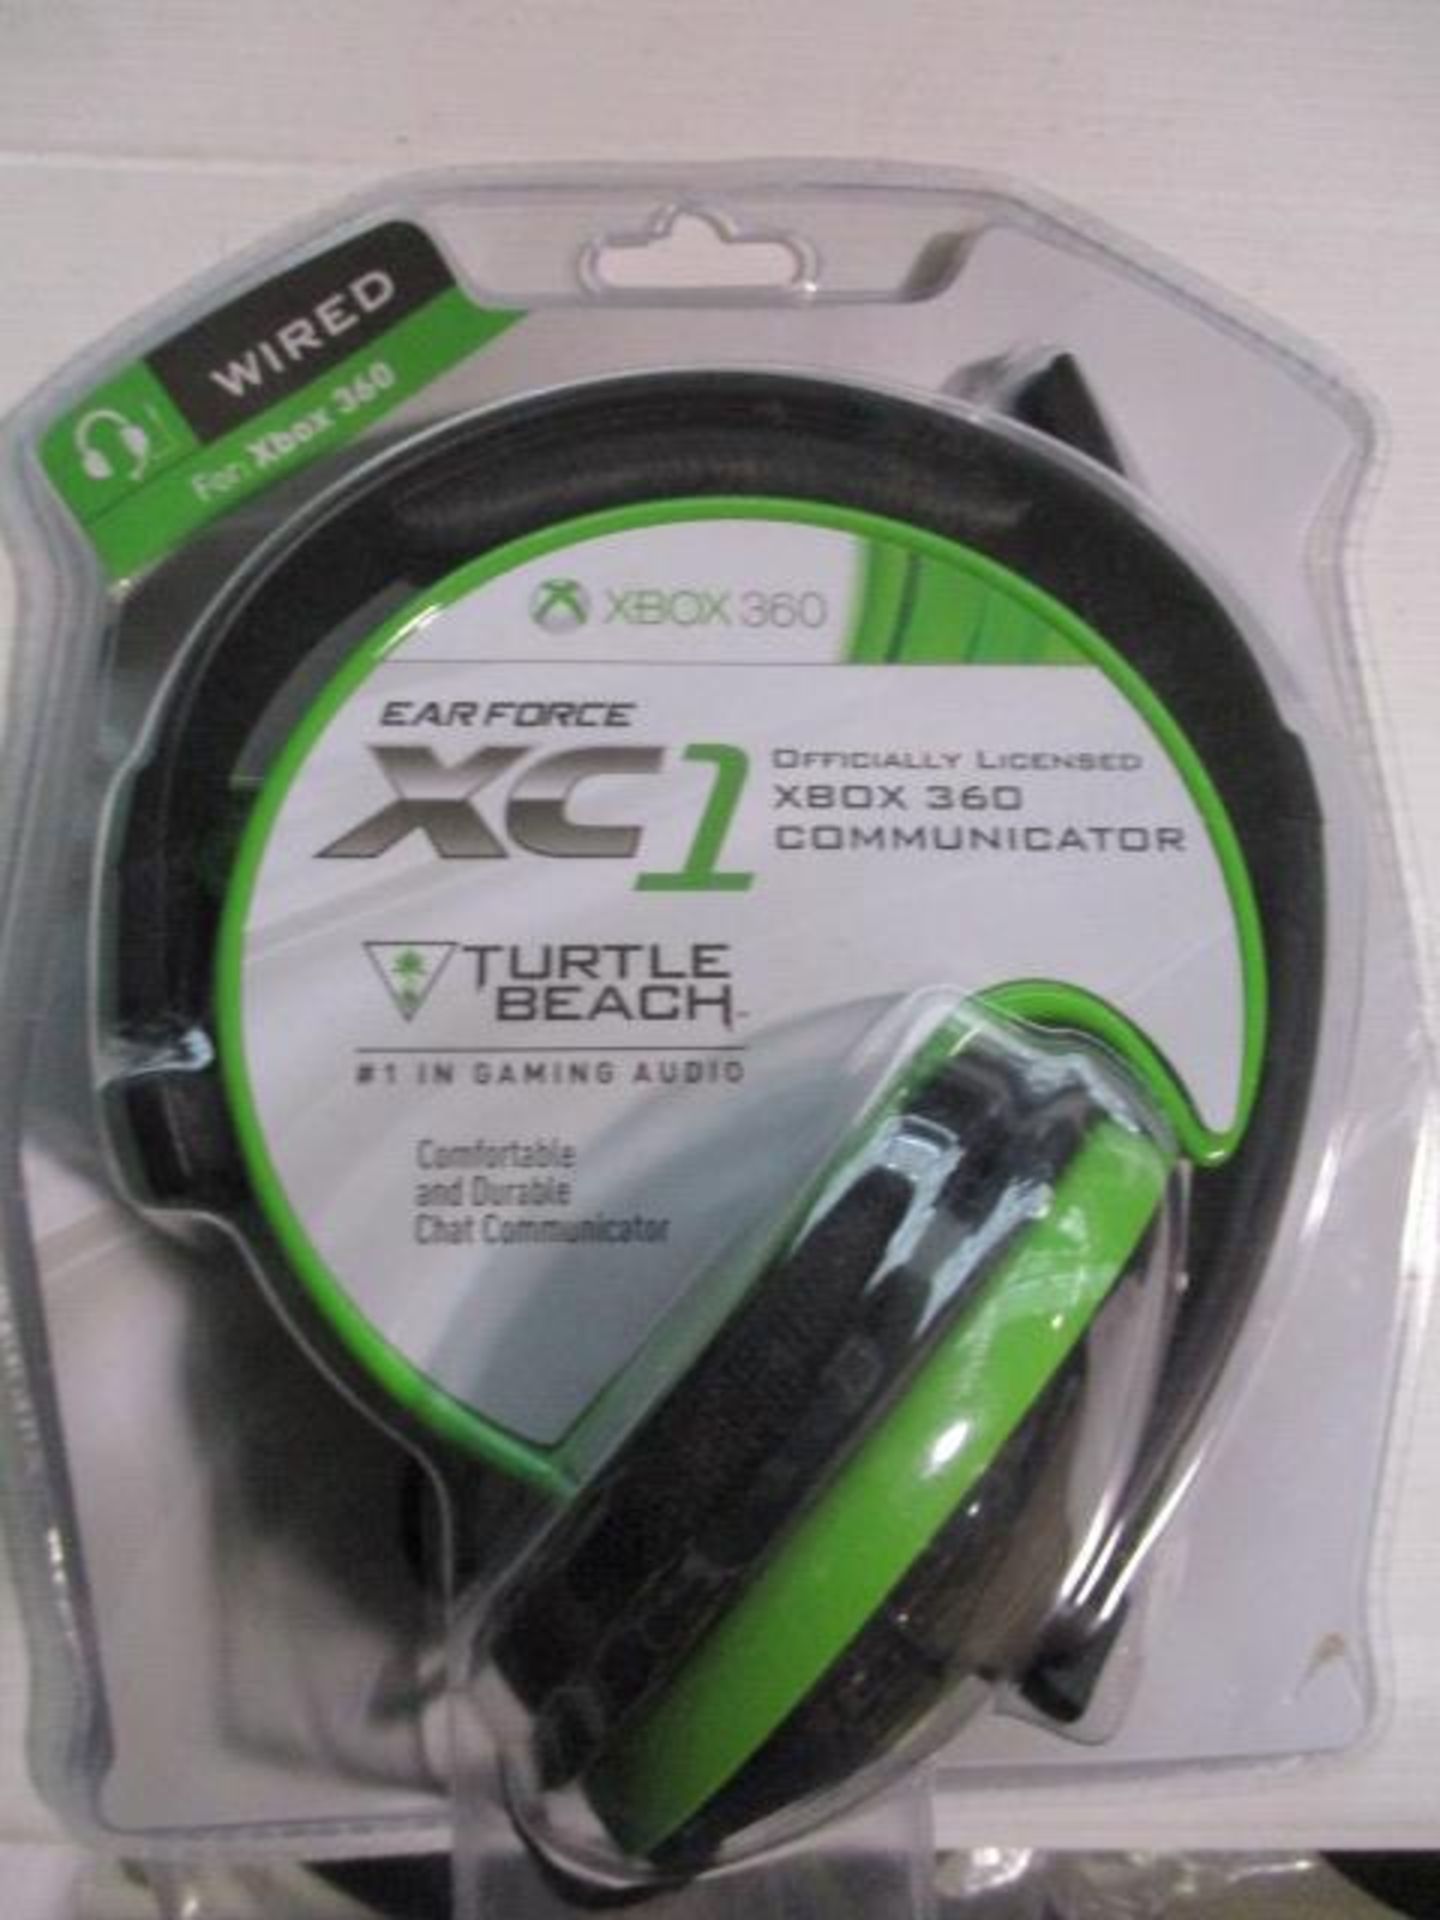 Turtle Beach Wired XC1 boxed and unchecked